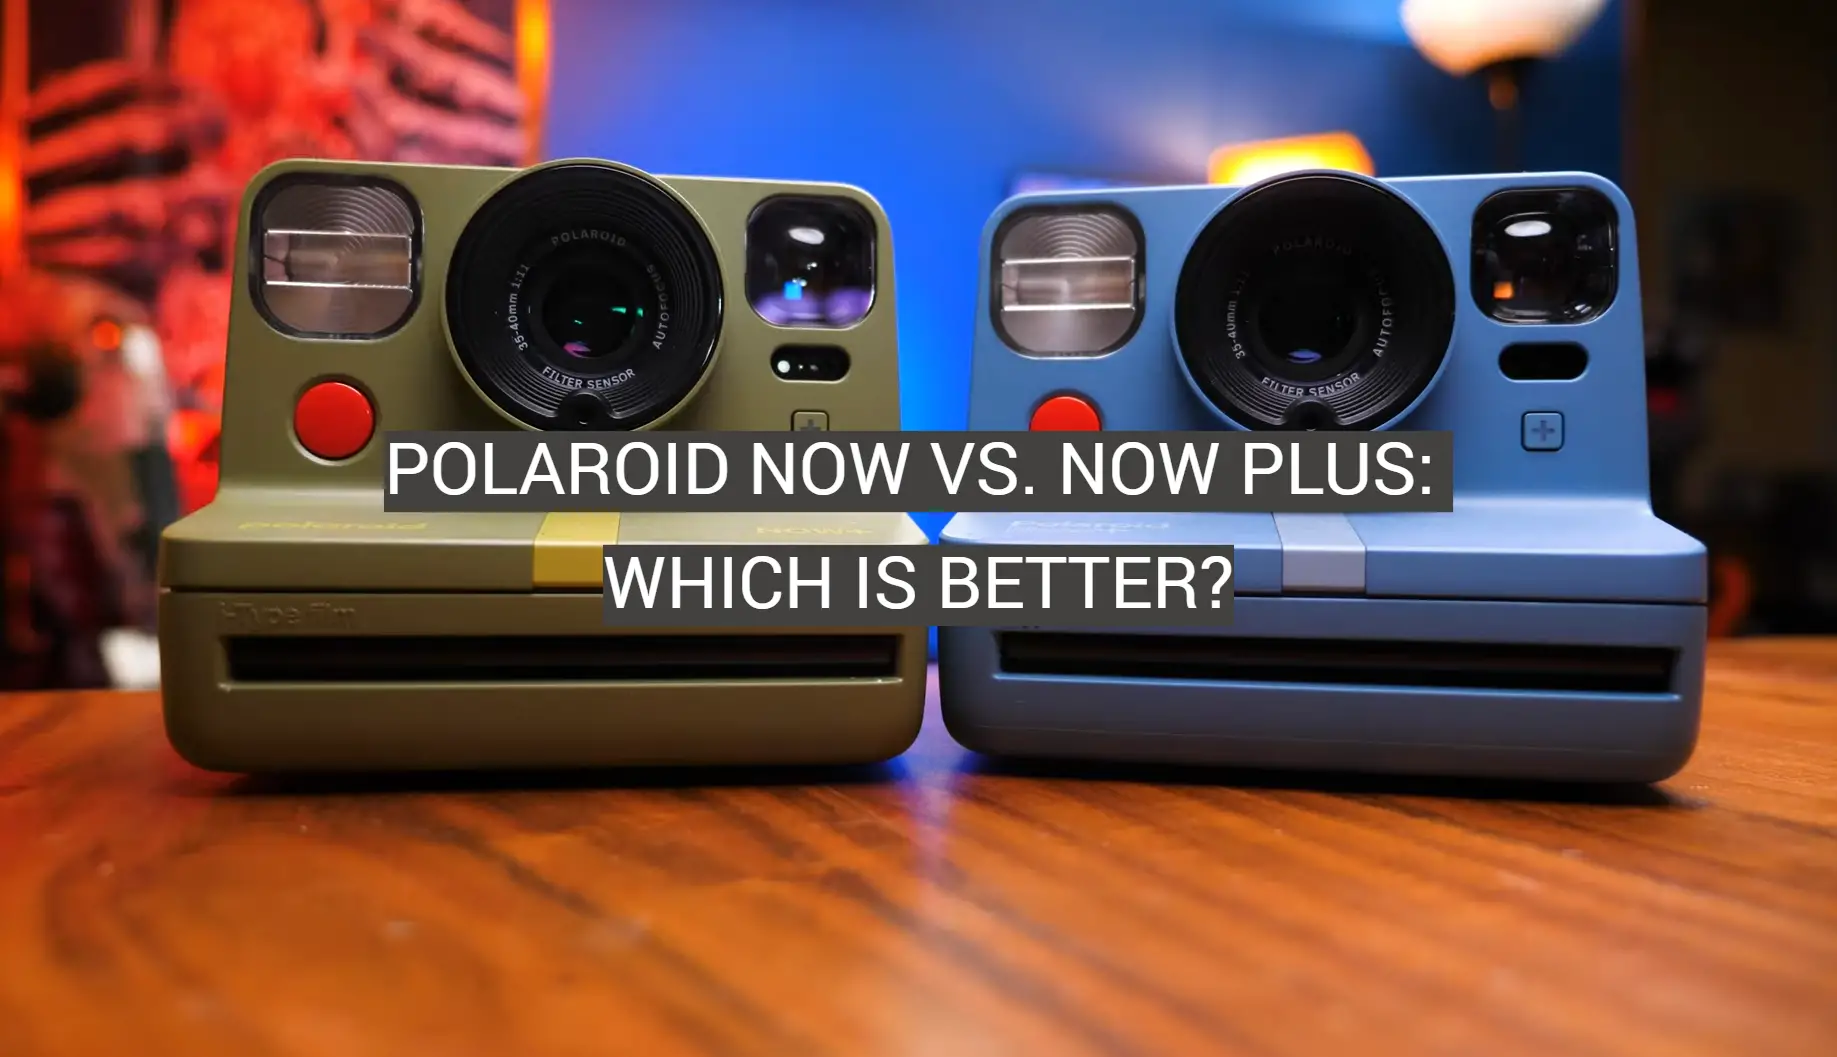 Polaroid Now vs. Now Plus: Which is Better?